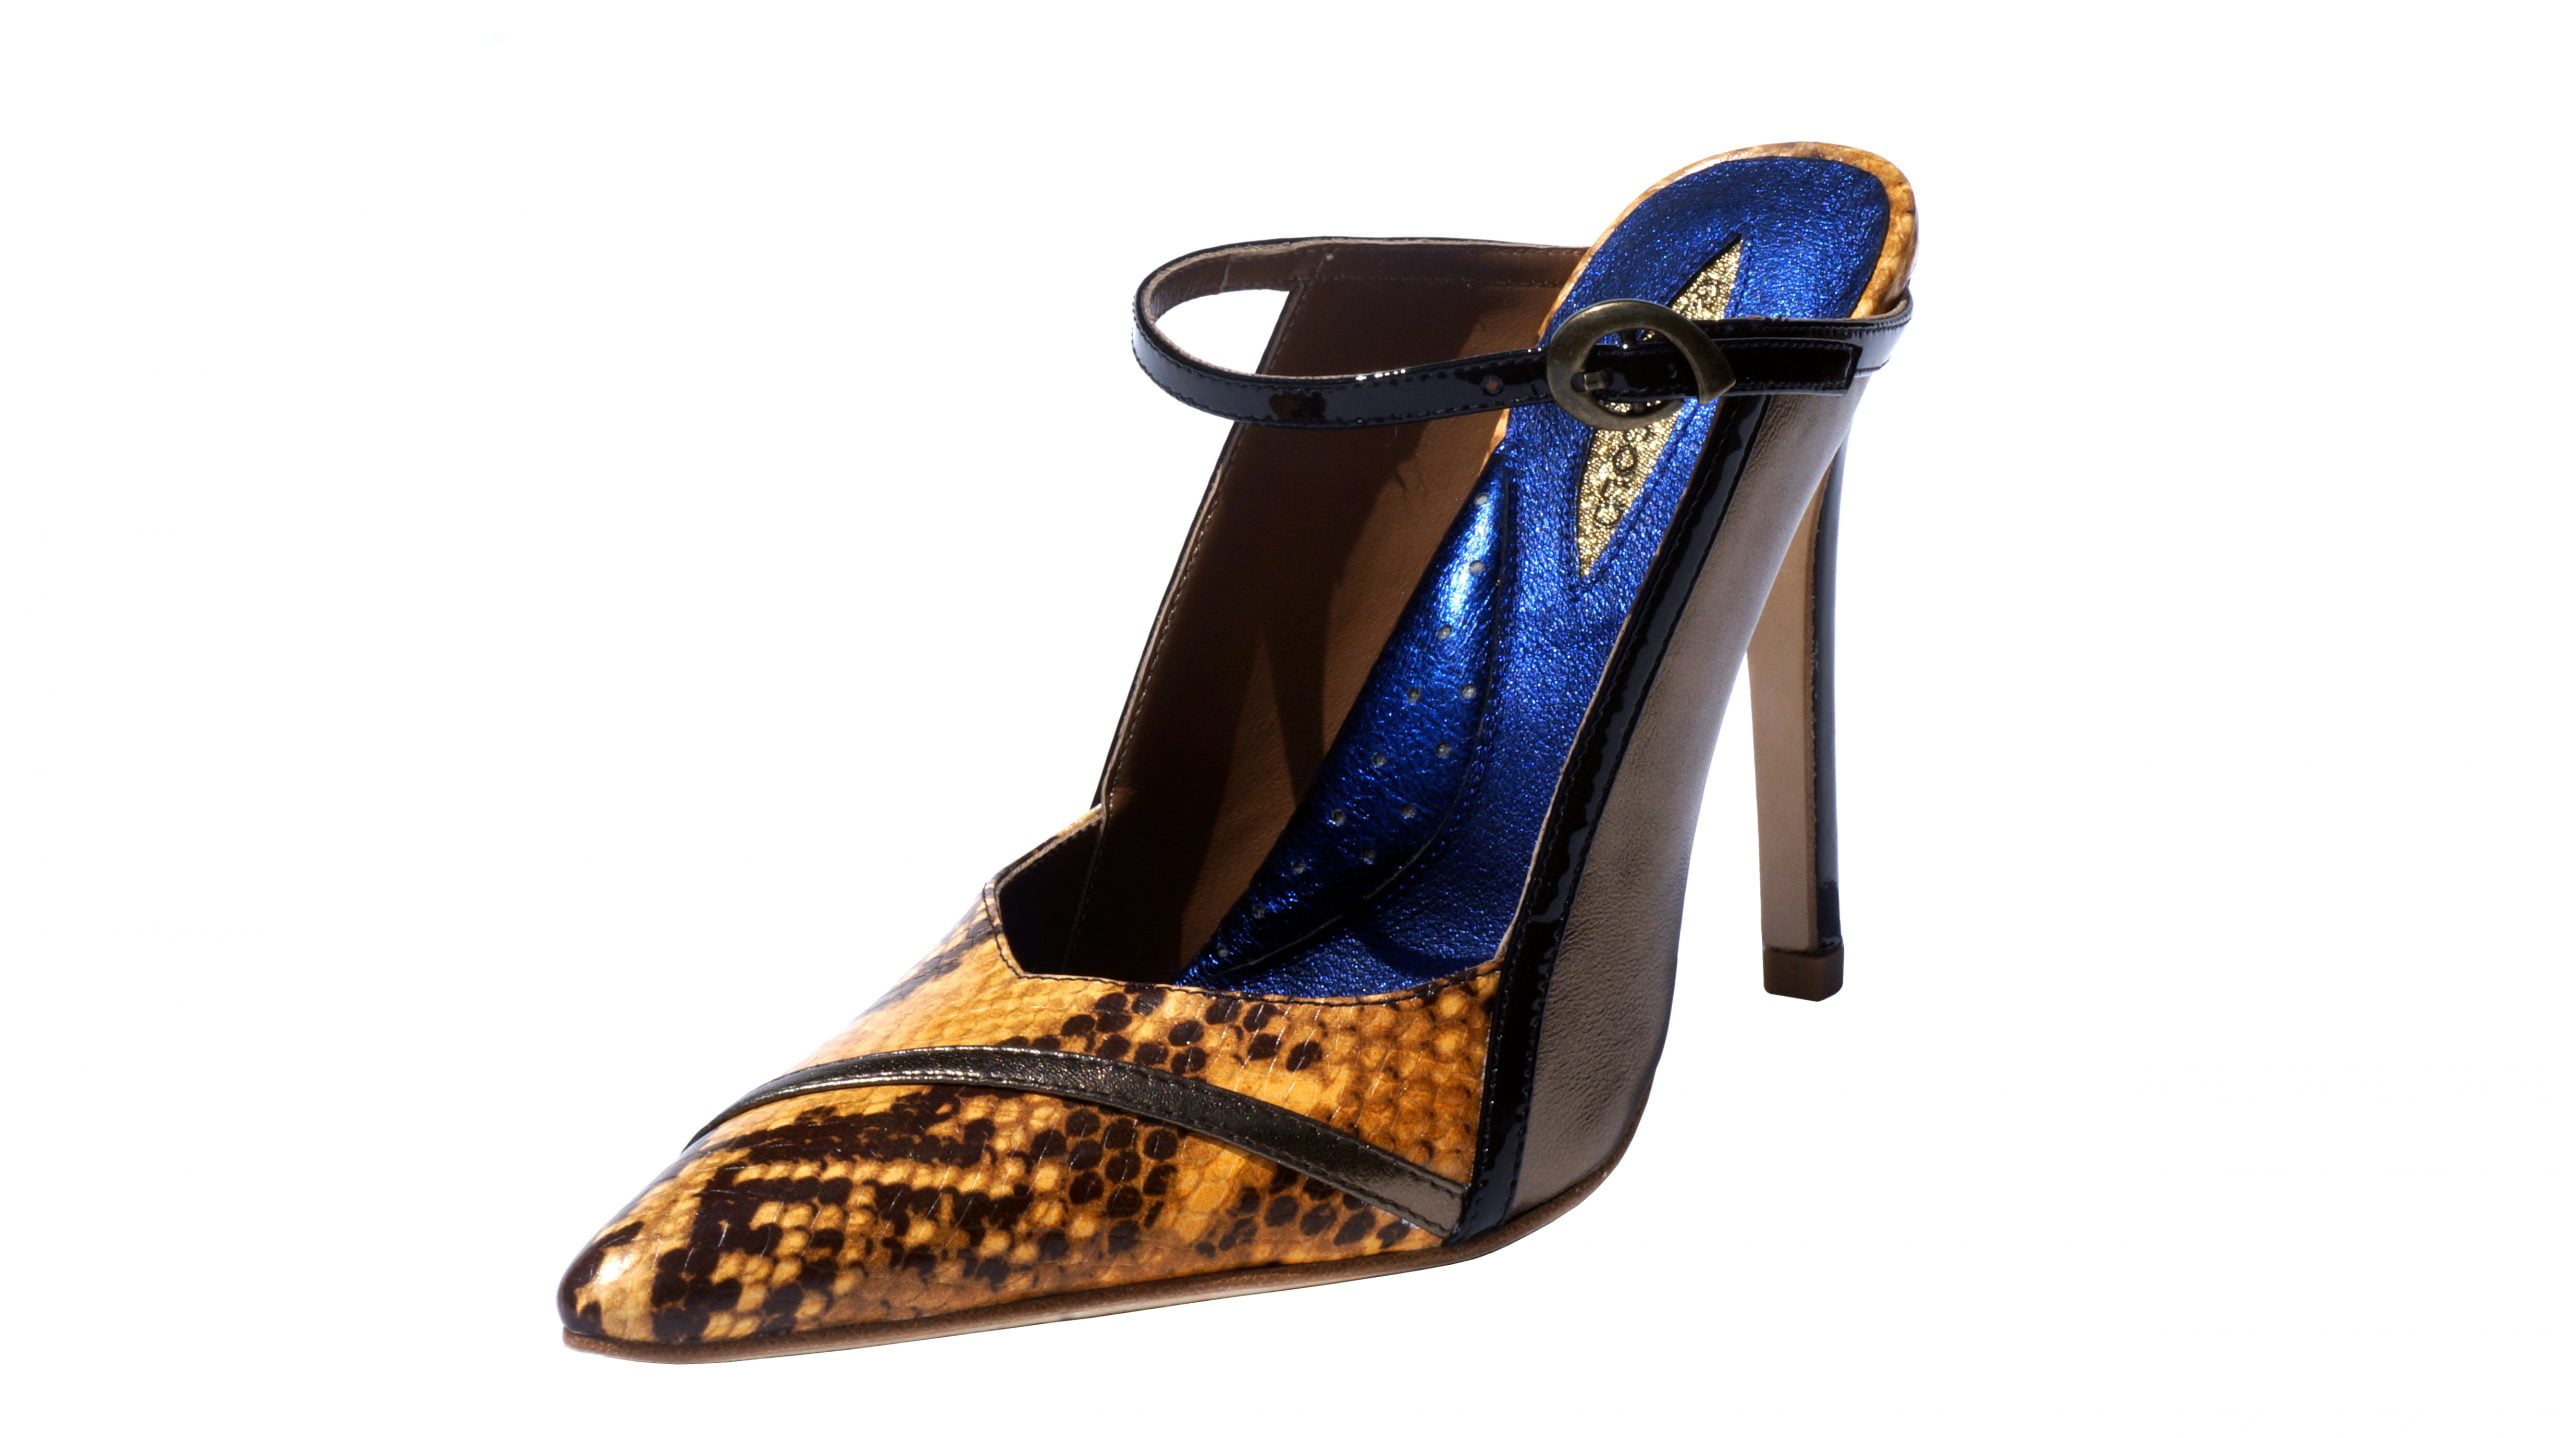 Bronze snake nappa leather, 4 inch heel mule style shoes